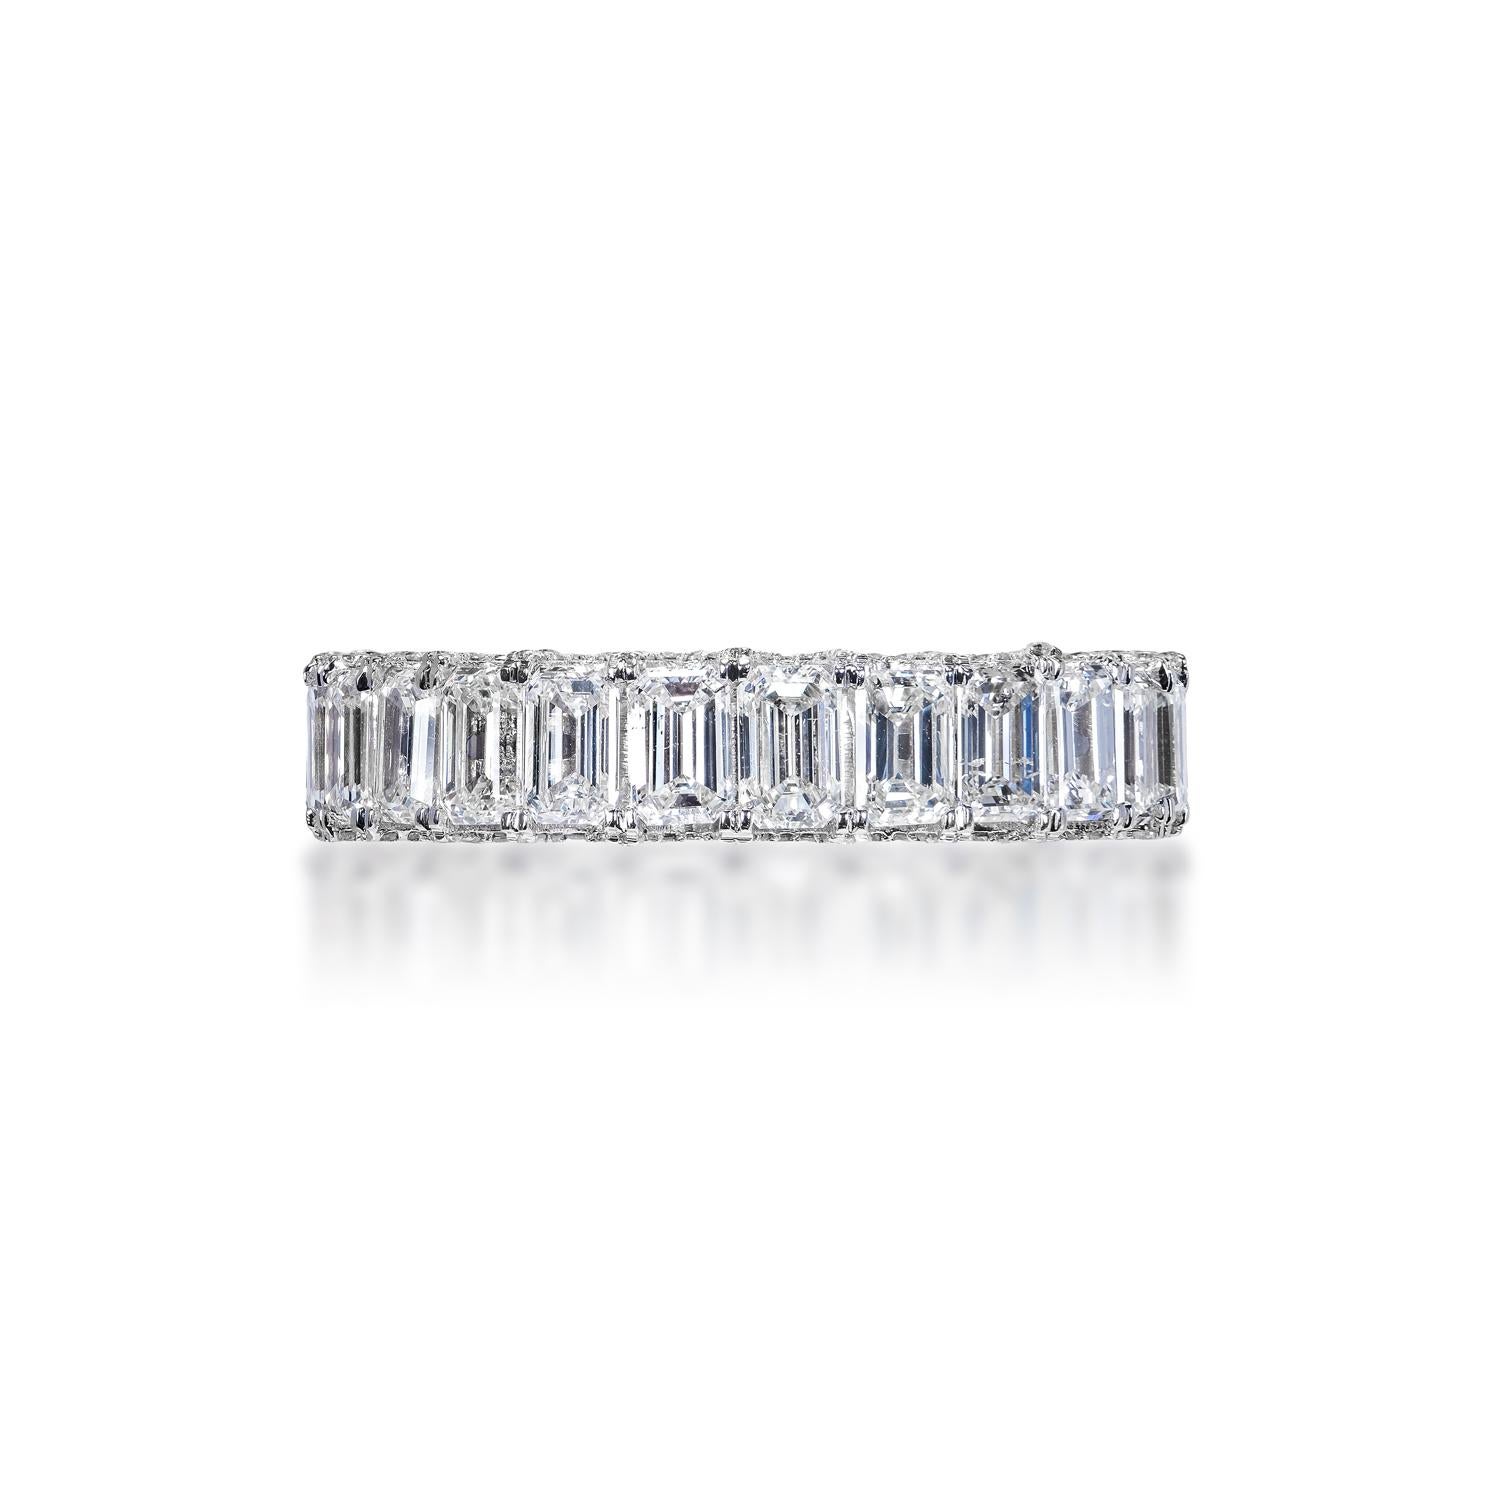 Emerald Cut 5 Carat Emerald Diamond with Micro Pavé set prongs Eternity Band Certified For Sale